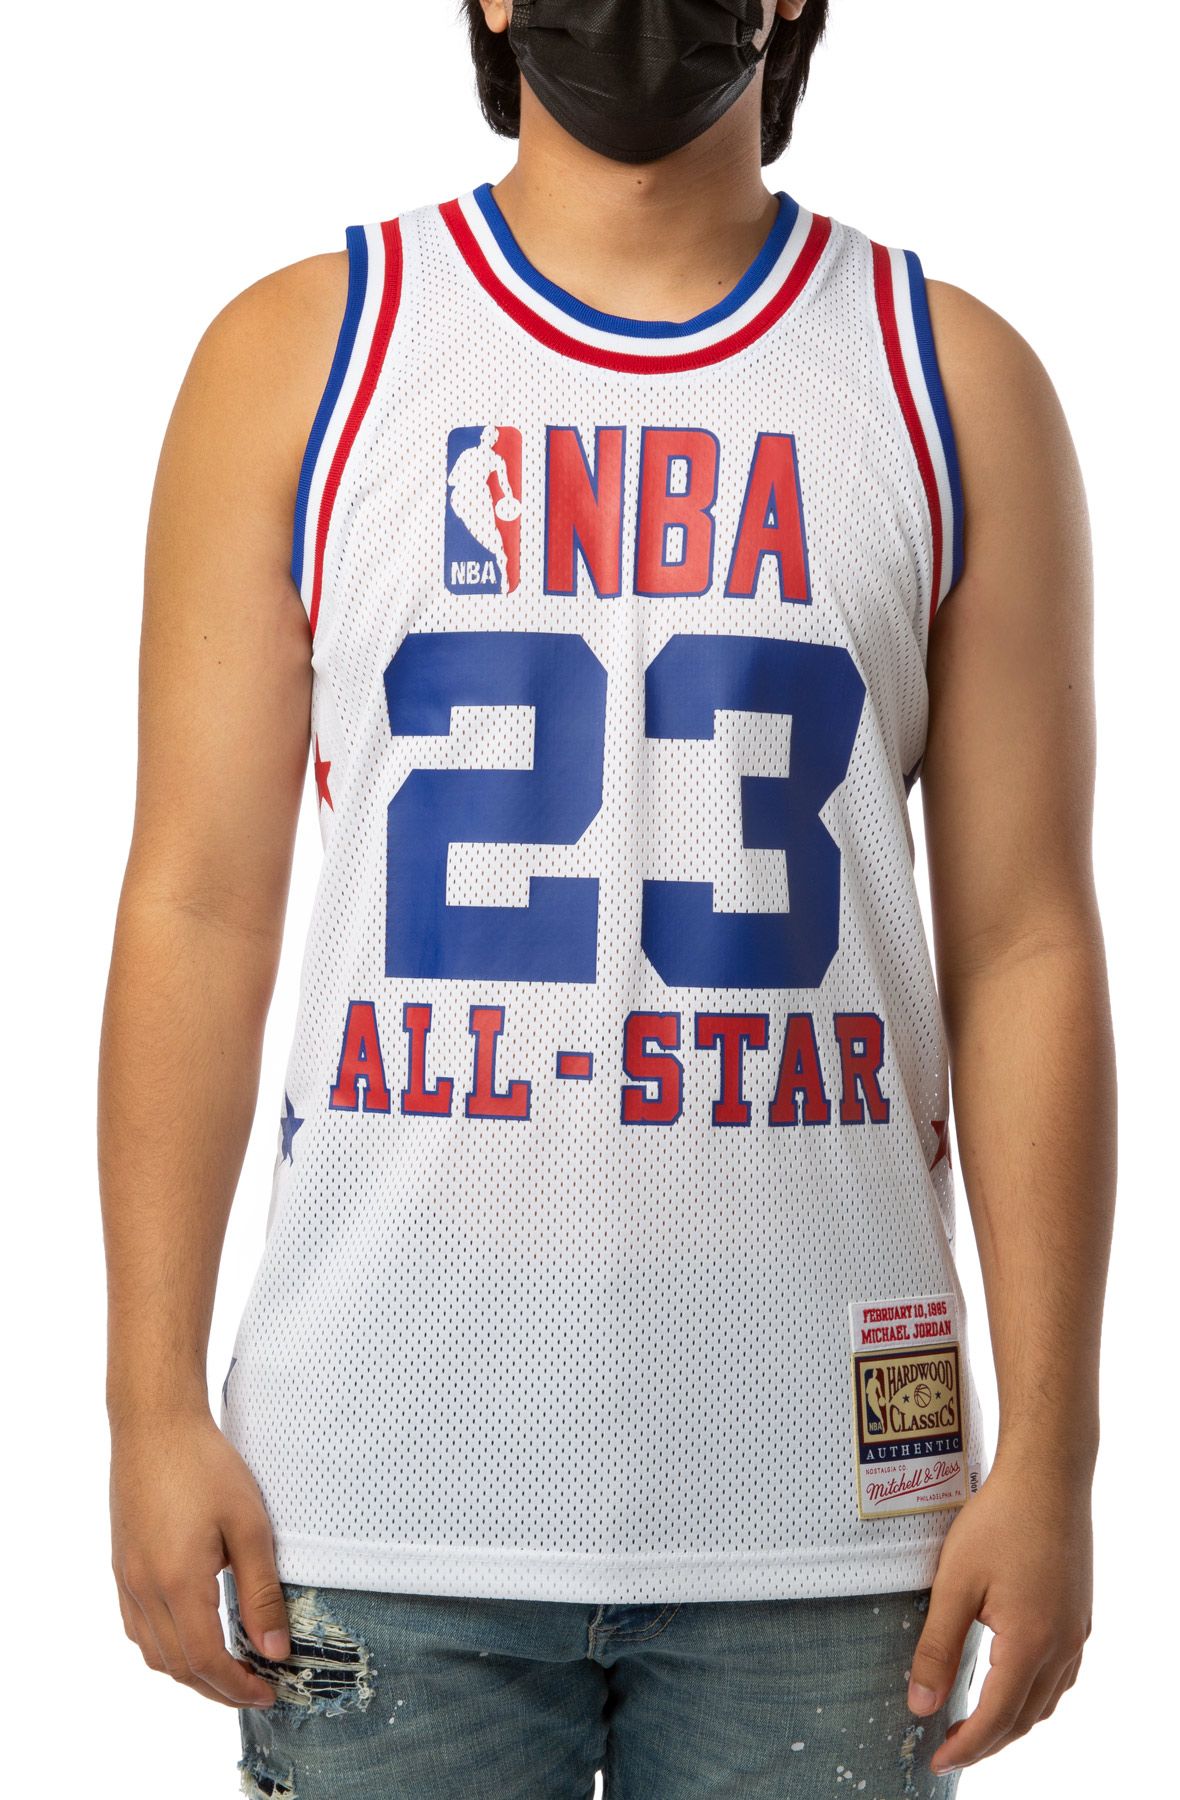 2003 Jordan Authentic All Star Jersey (front)  Michael jordan jersey, Michael  jordan, Jordan jersey